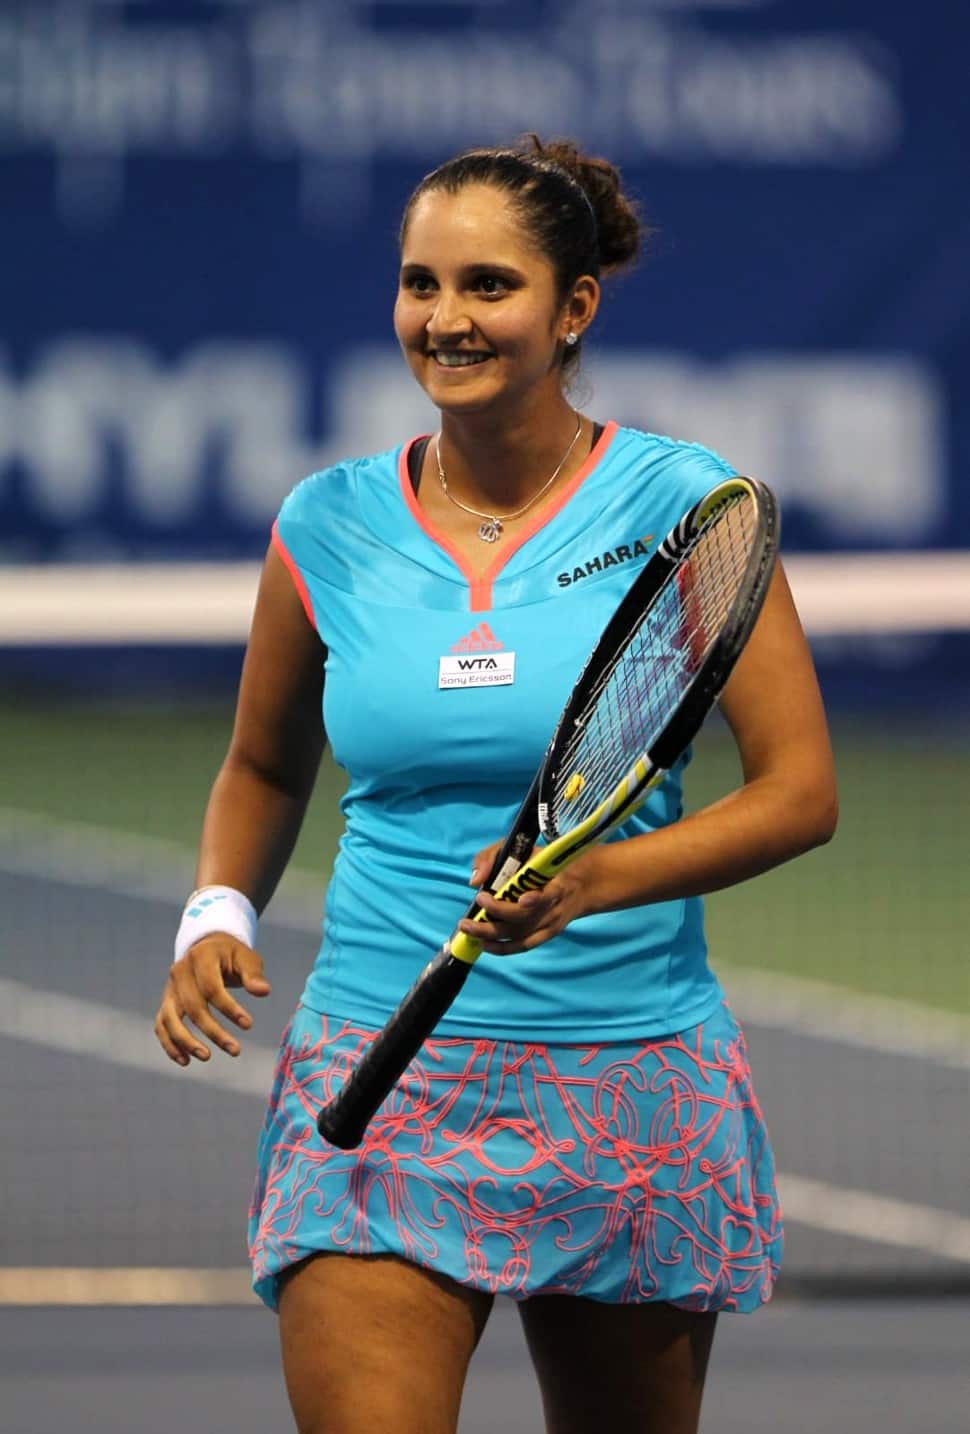 In the doubles front, Sania Mirza rose to No. 1 in the WTA Doubles Rankings in April 2015, becoming the first Indian in history to reach the summit. Even on the ATP stage, only Leander Paes and Mahesh Bhupathi have reached No. 1 in doubles standings. The Indian ace even sustained her top spot for almost 21 months before finally dropping down in January 2017. (Source: Twitter)